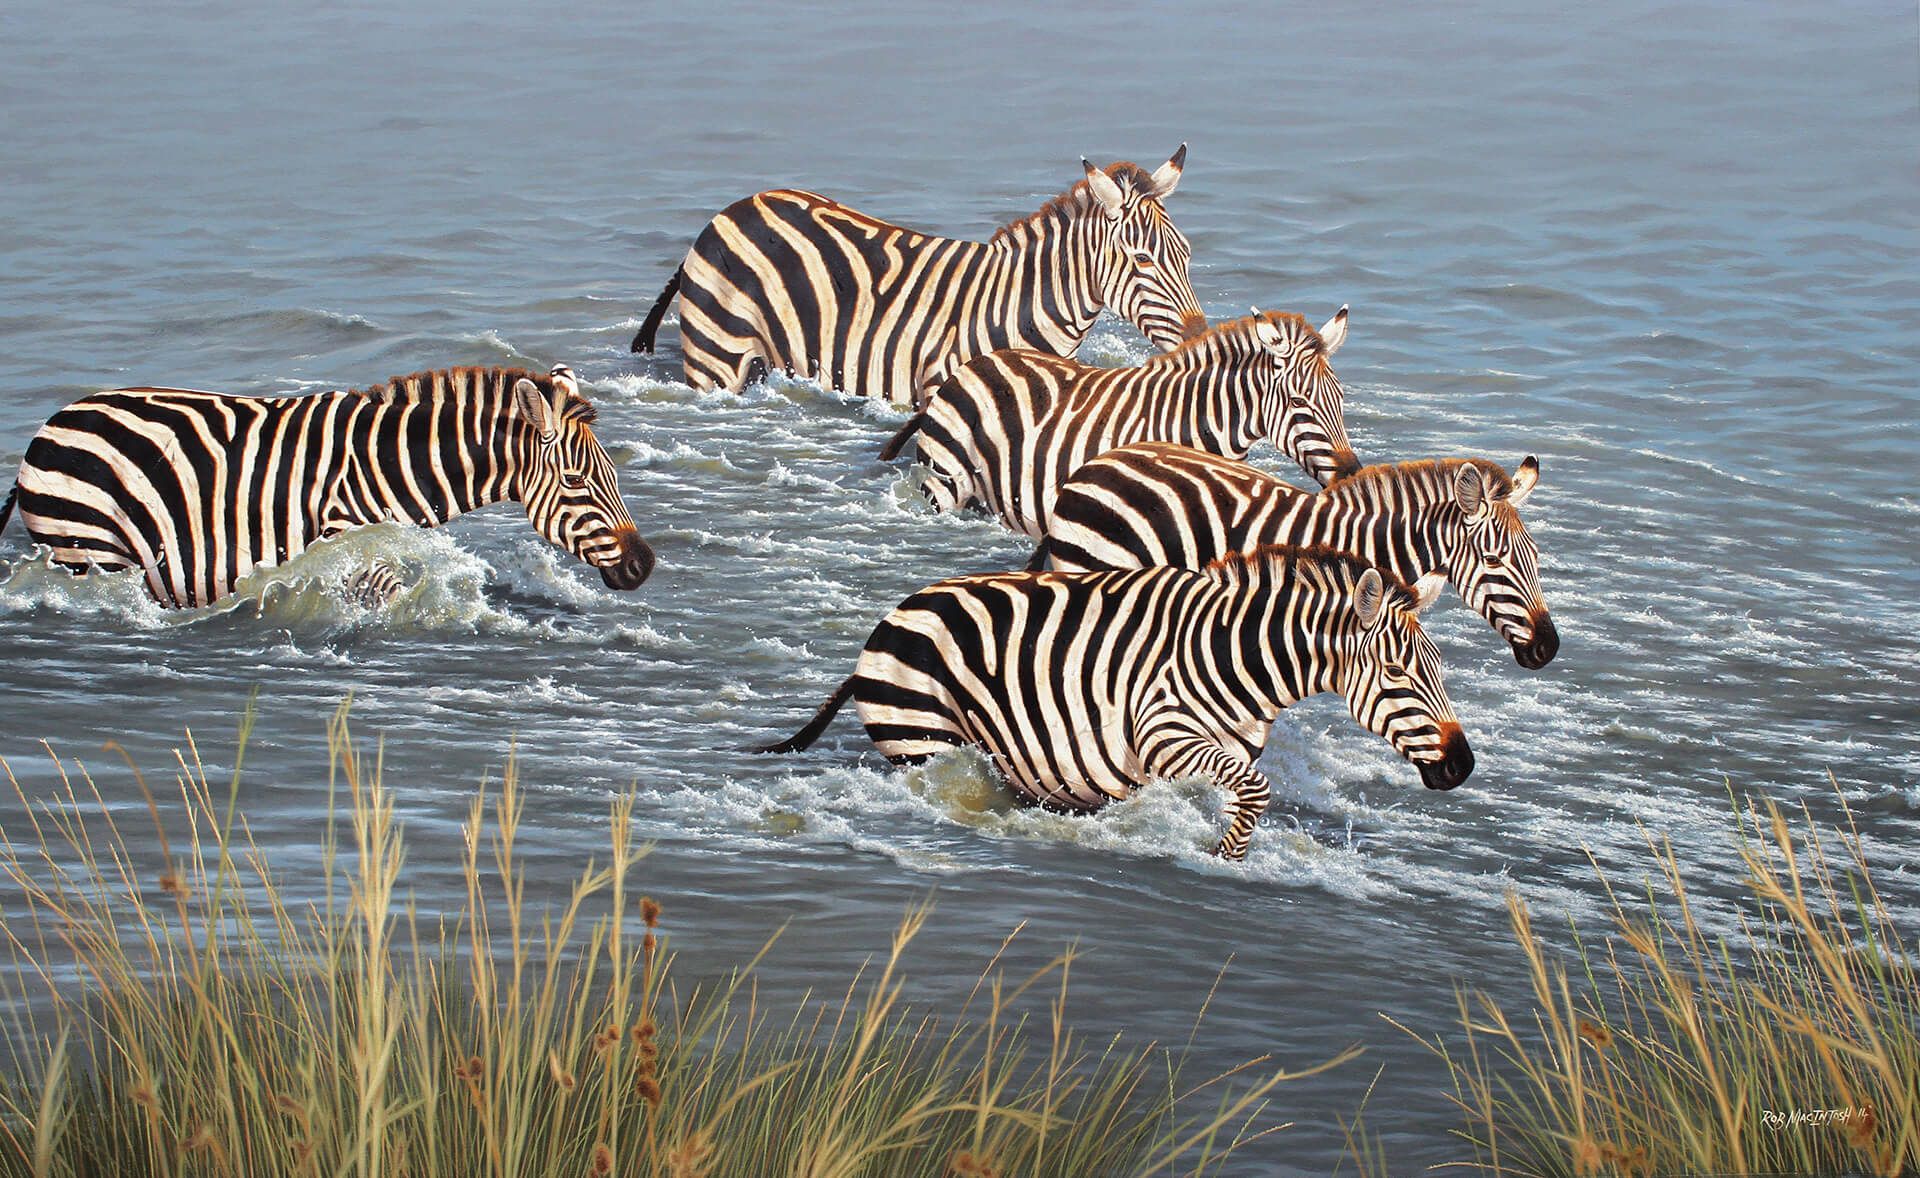 Photorealistic painting of zebras running through river